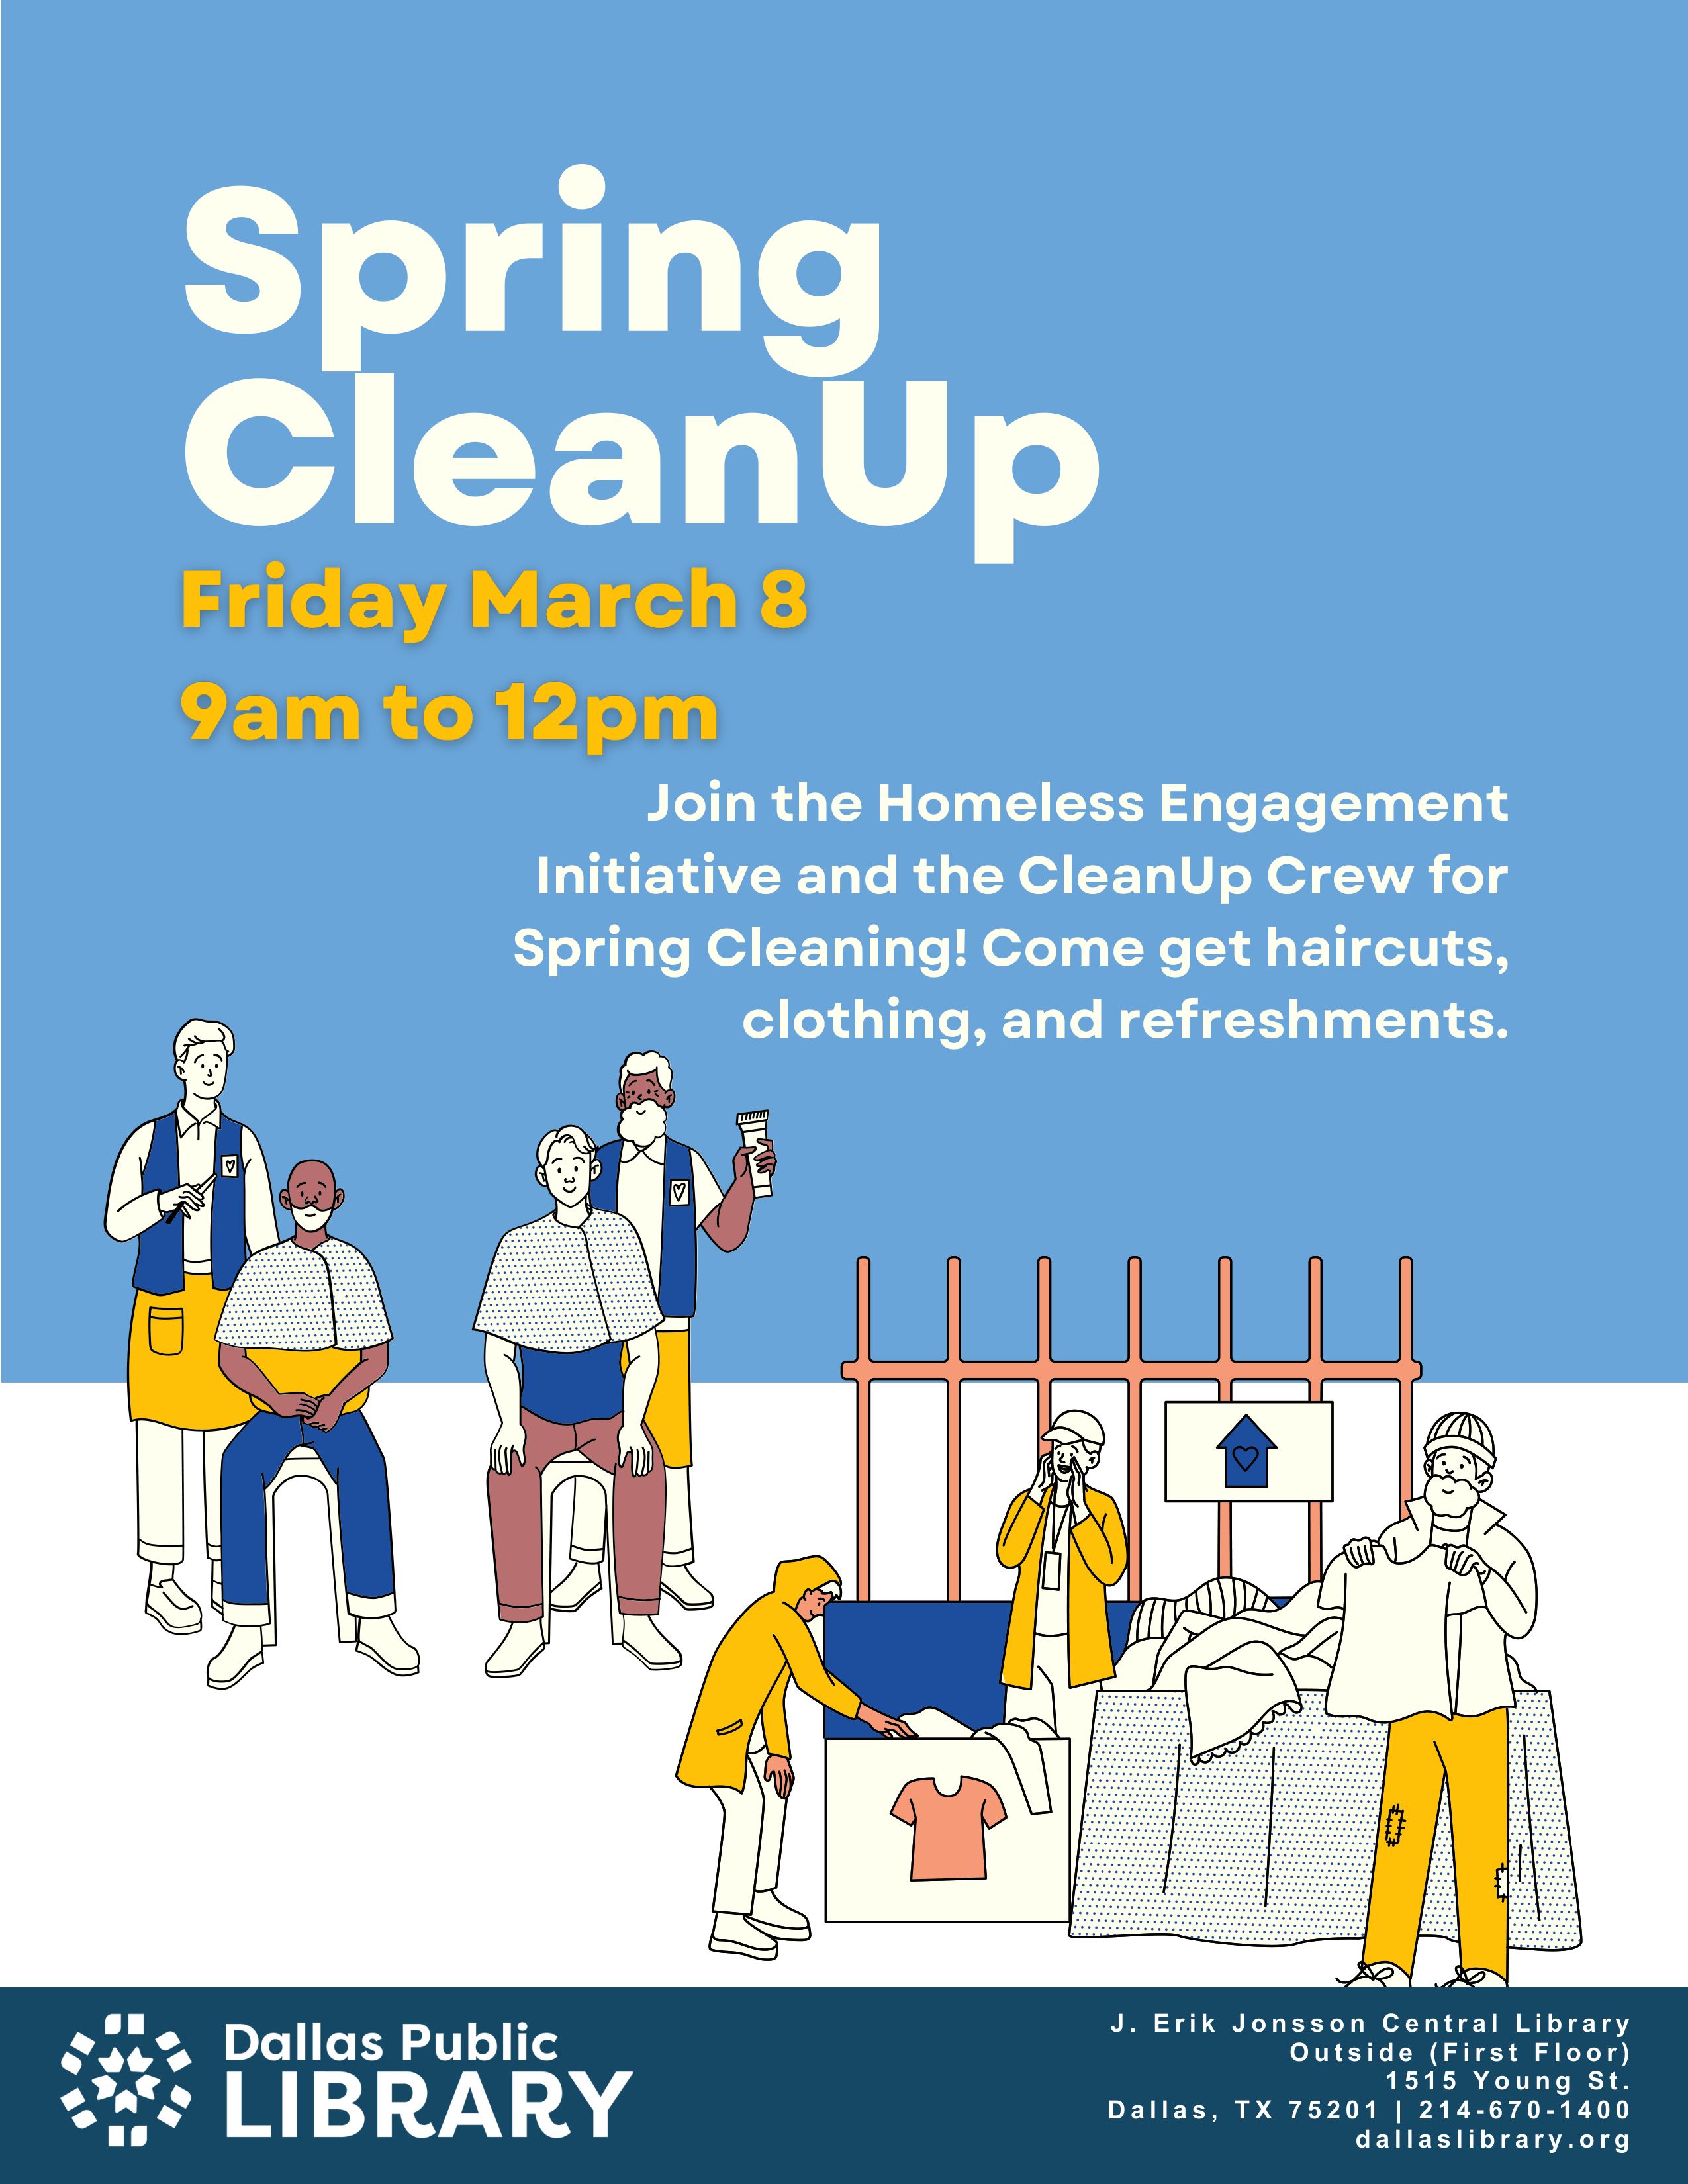 Spring CleanUP: Friday March 8th from 9:00am to 12:00pm. Join the Homeless Engagement Initiative and CleanUP USA for free haircuts and clothing outside of the J Erik Jonsson Central Library. 